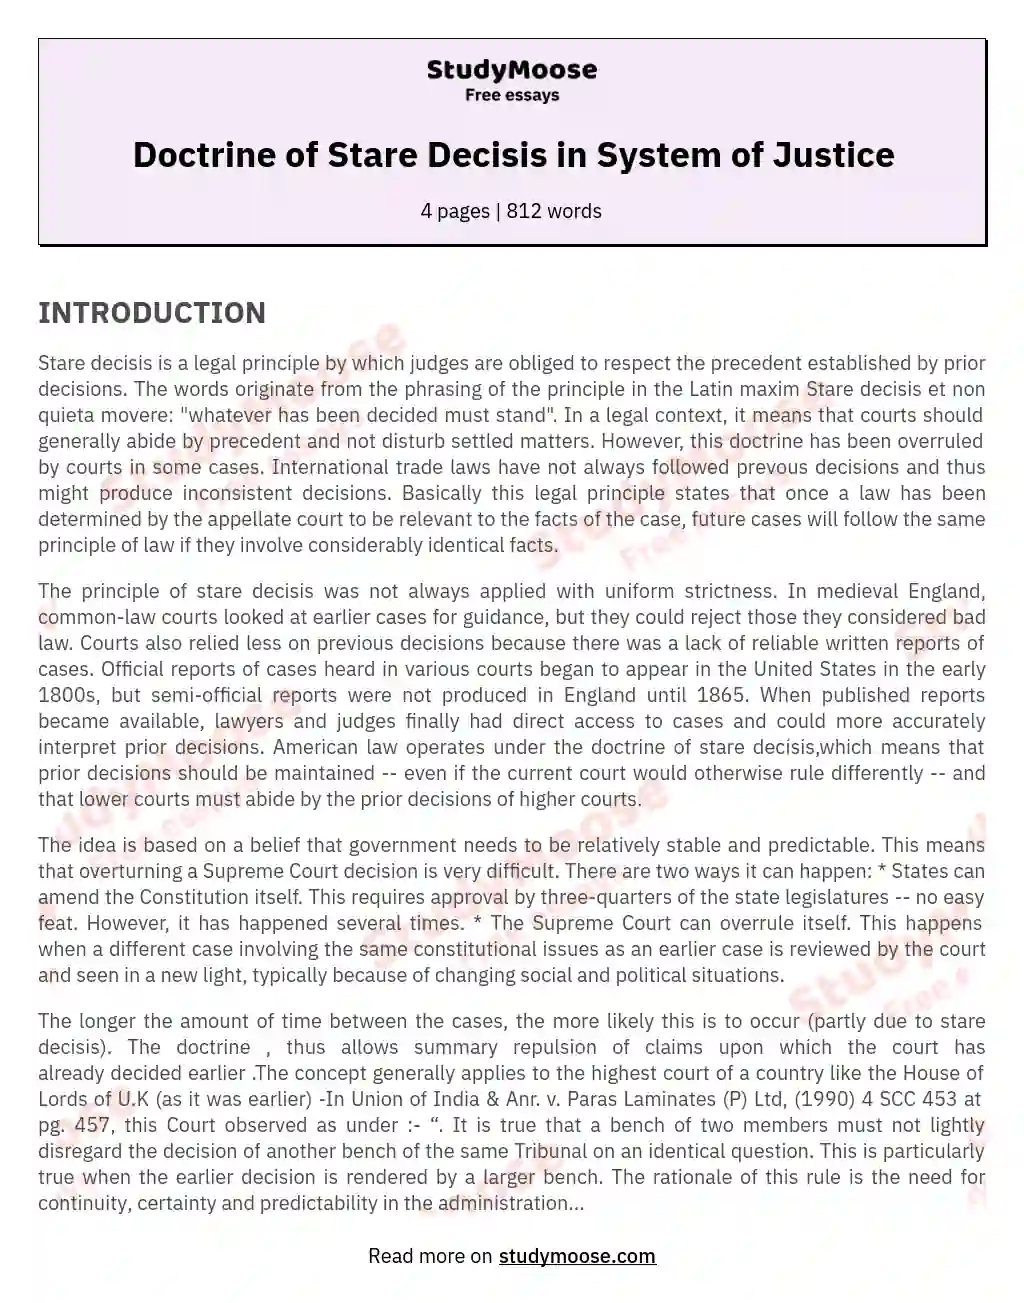 Doctrine of Stare Decisis in System of Justice essay